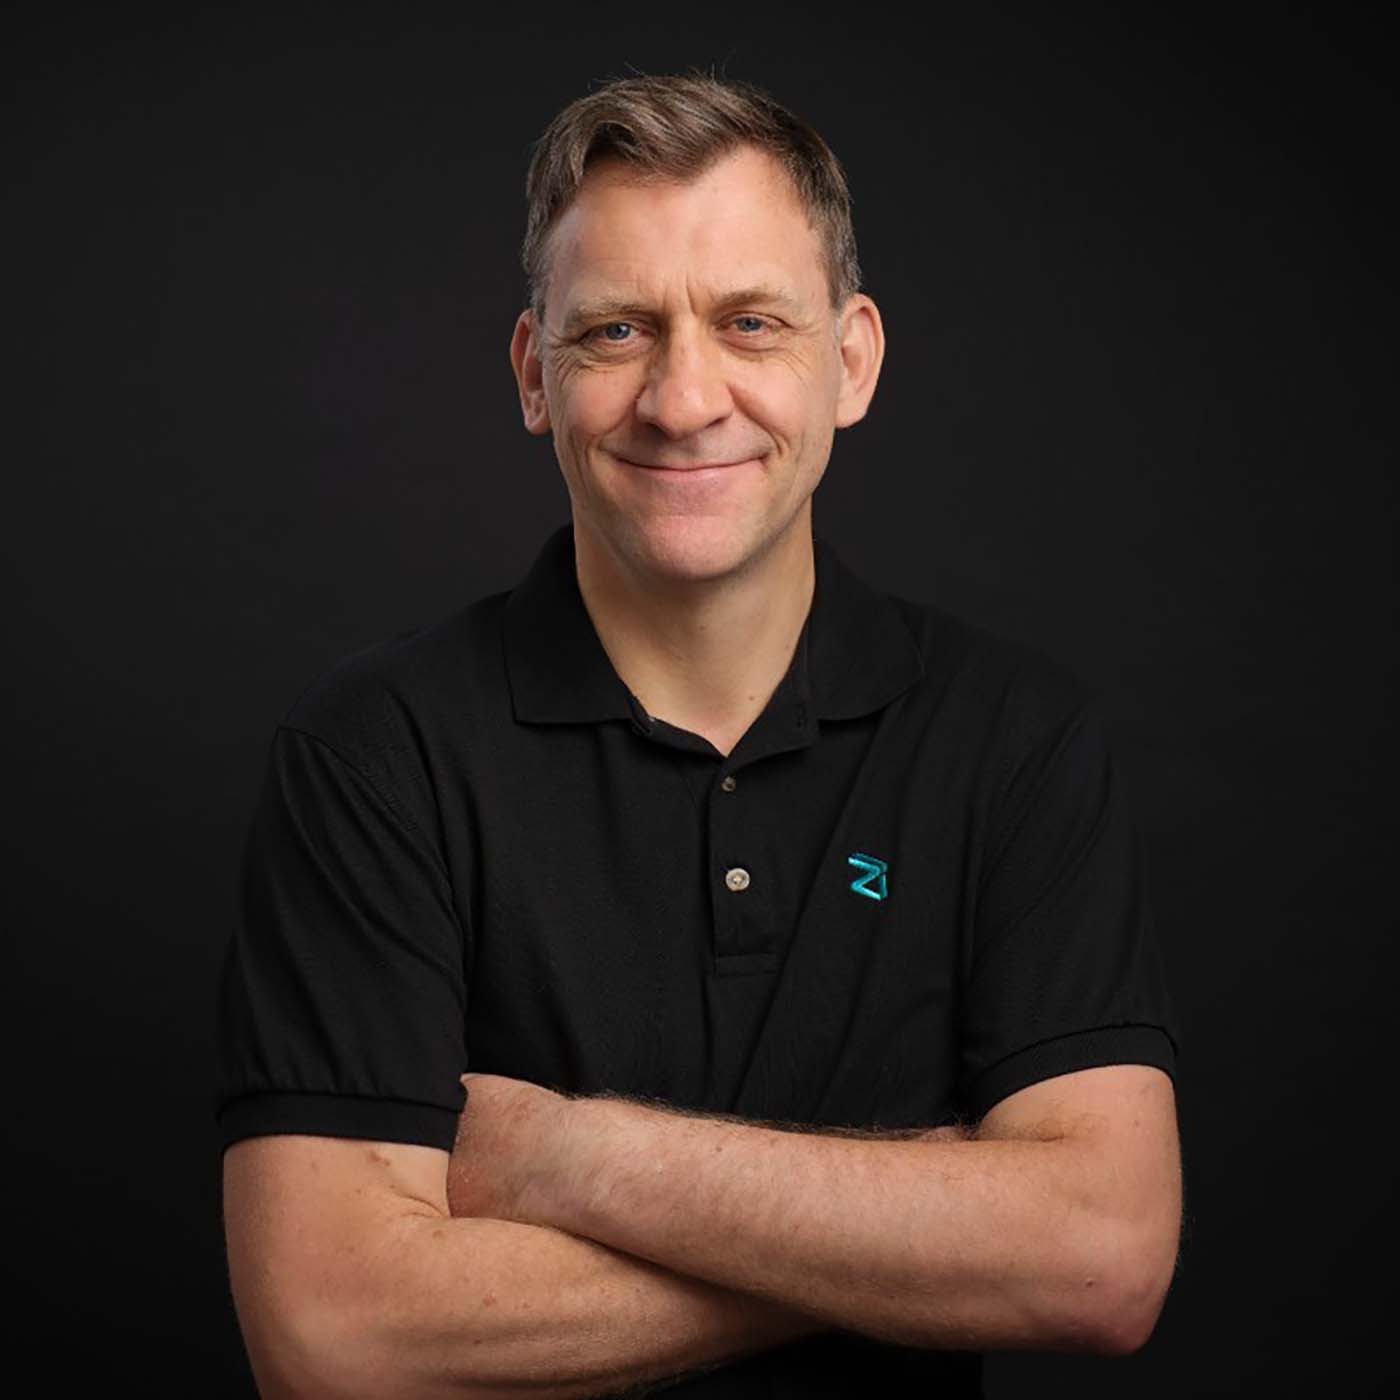 Colin Miles: Zilliqa's Chief Commercial Officer & Co-CEO